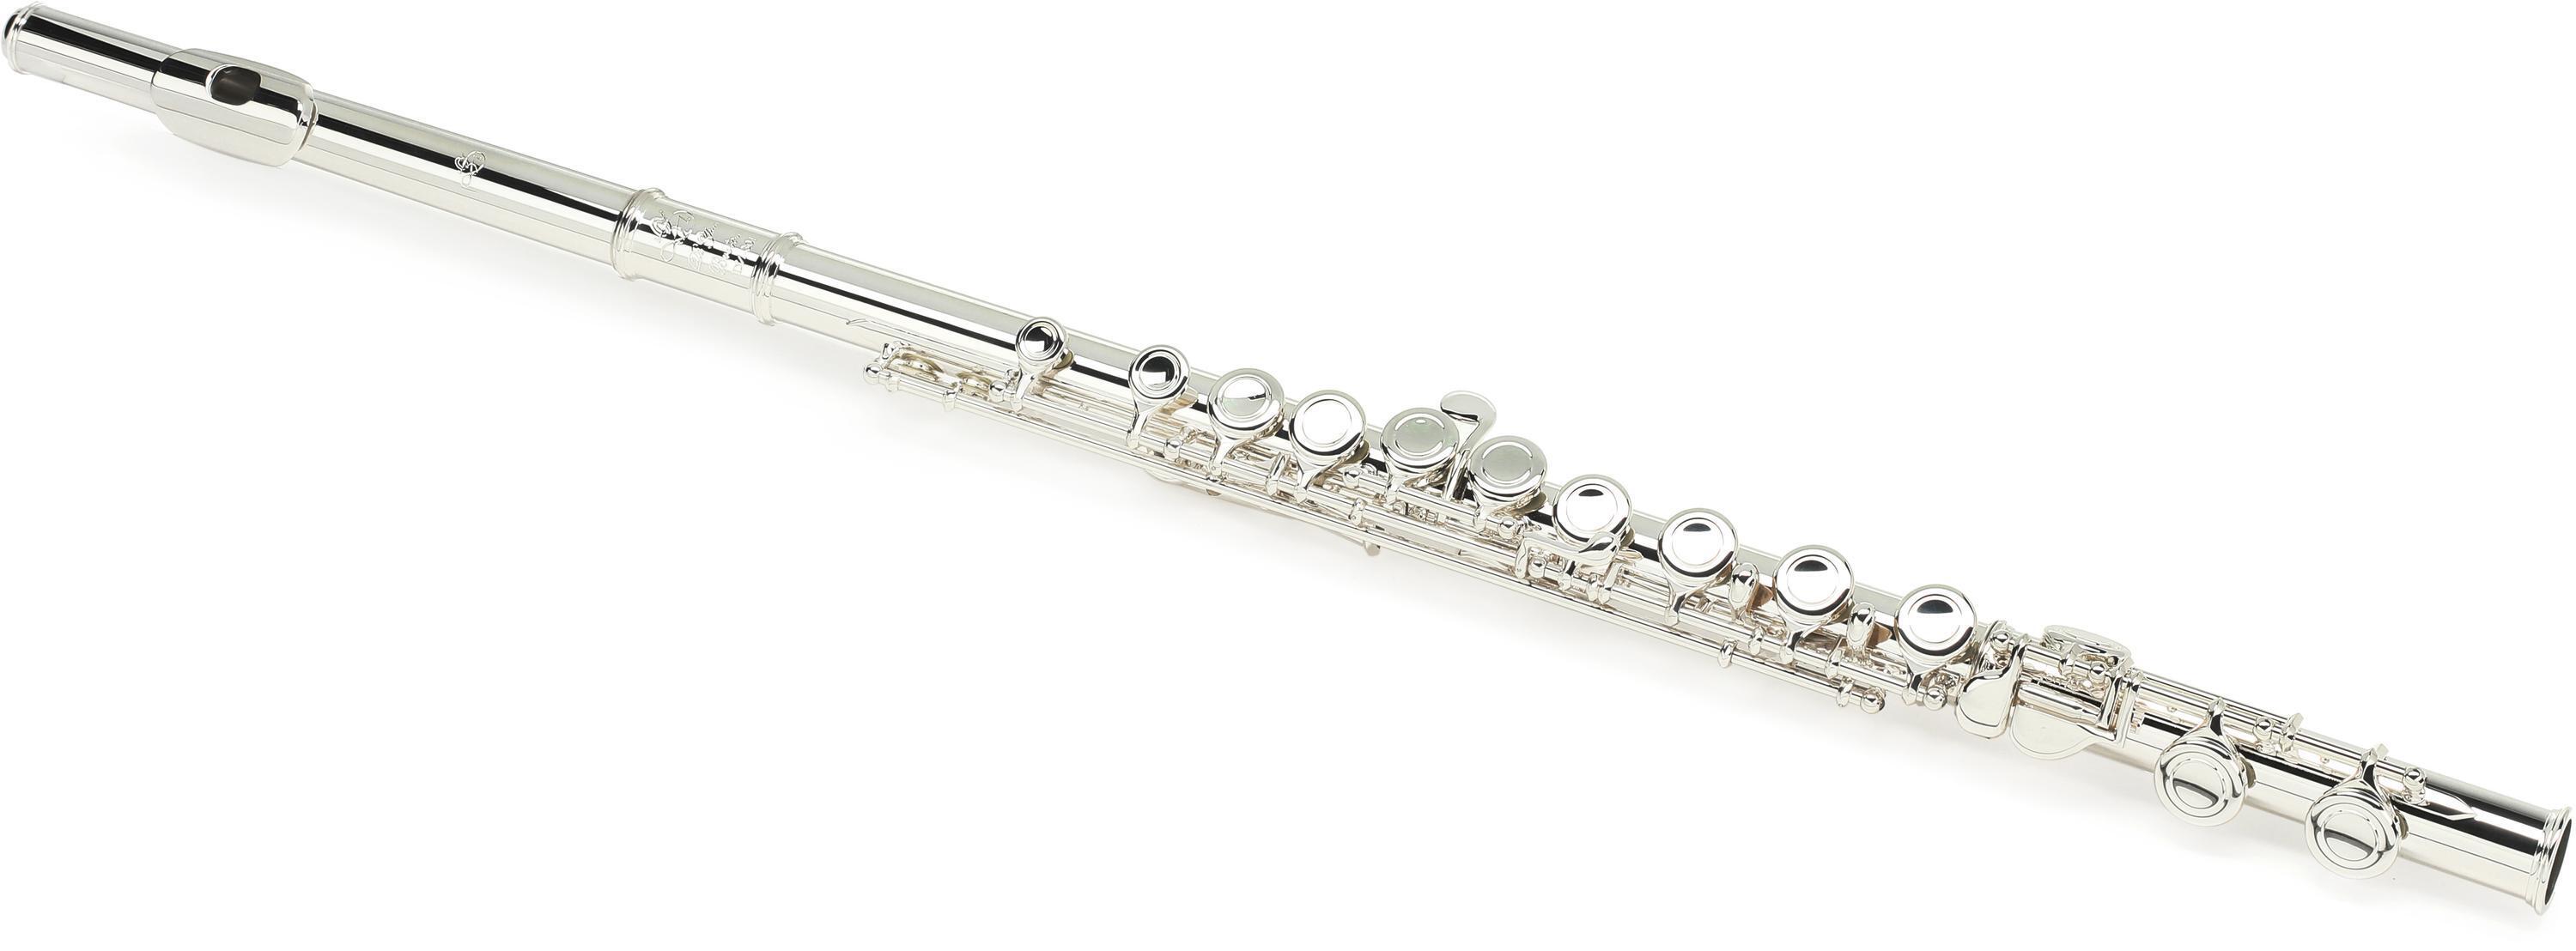 Di Zhao Flutes DZ 301 Student Flute with Offset G